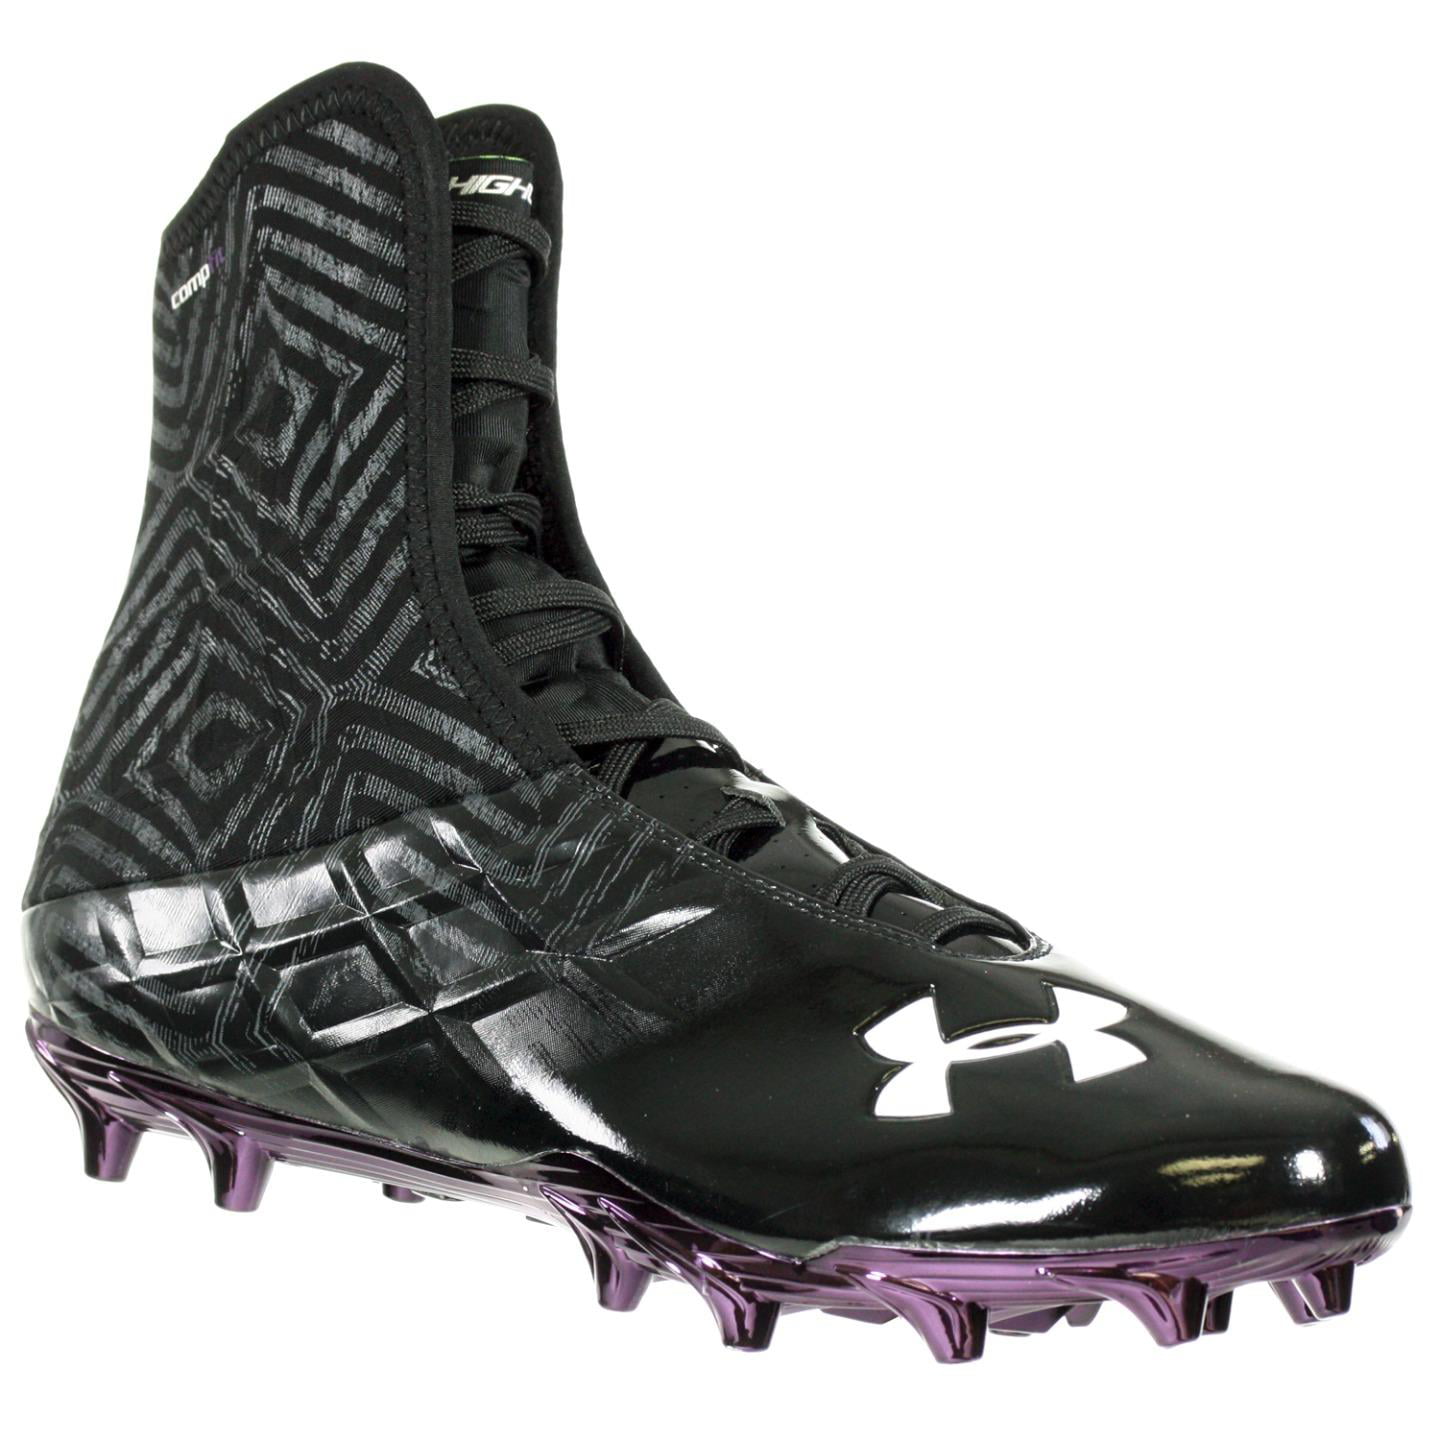 Details about   UNDER ARMOUR UA Highlight MC Black Purple TD Molded Football Cleats Mens 10.5 11 